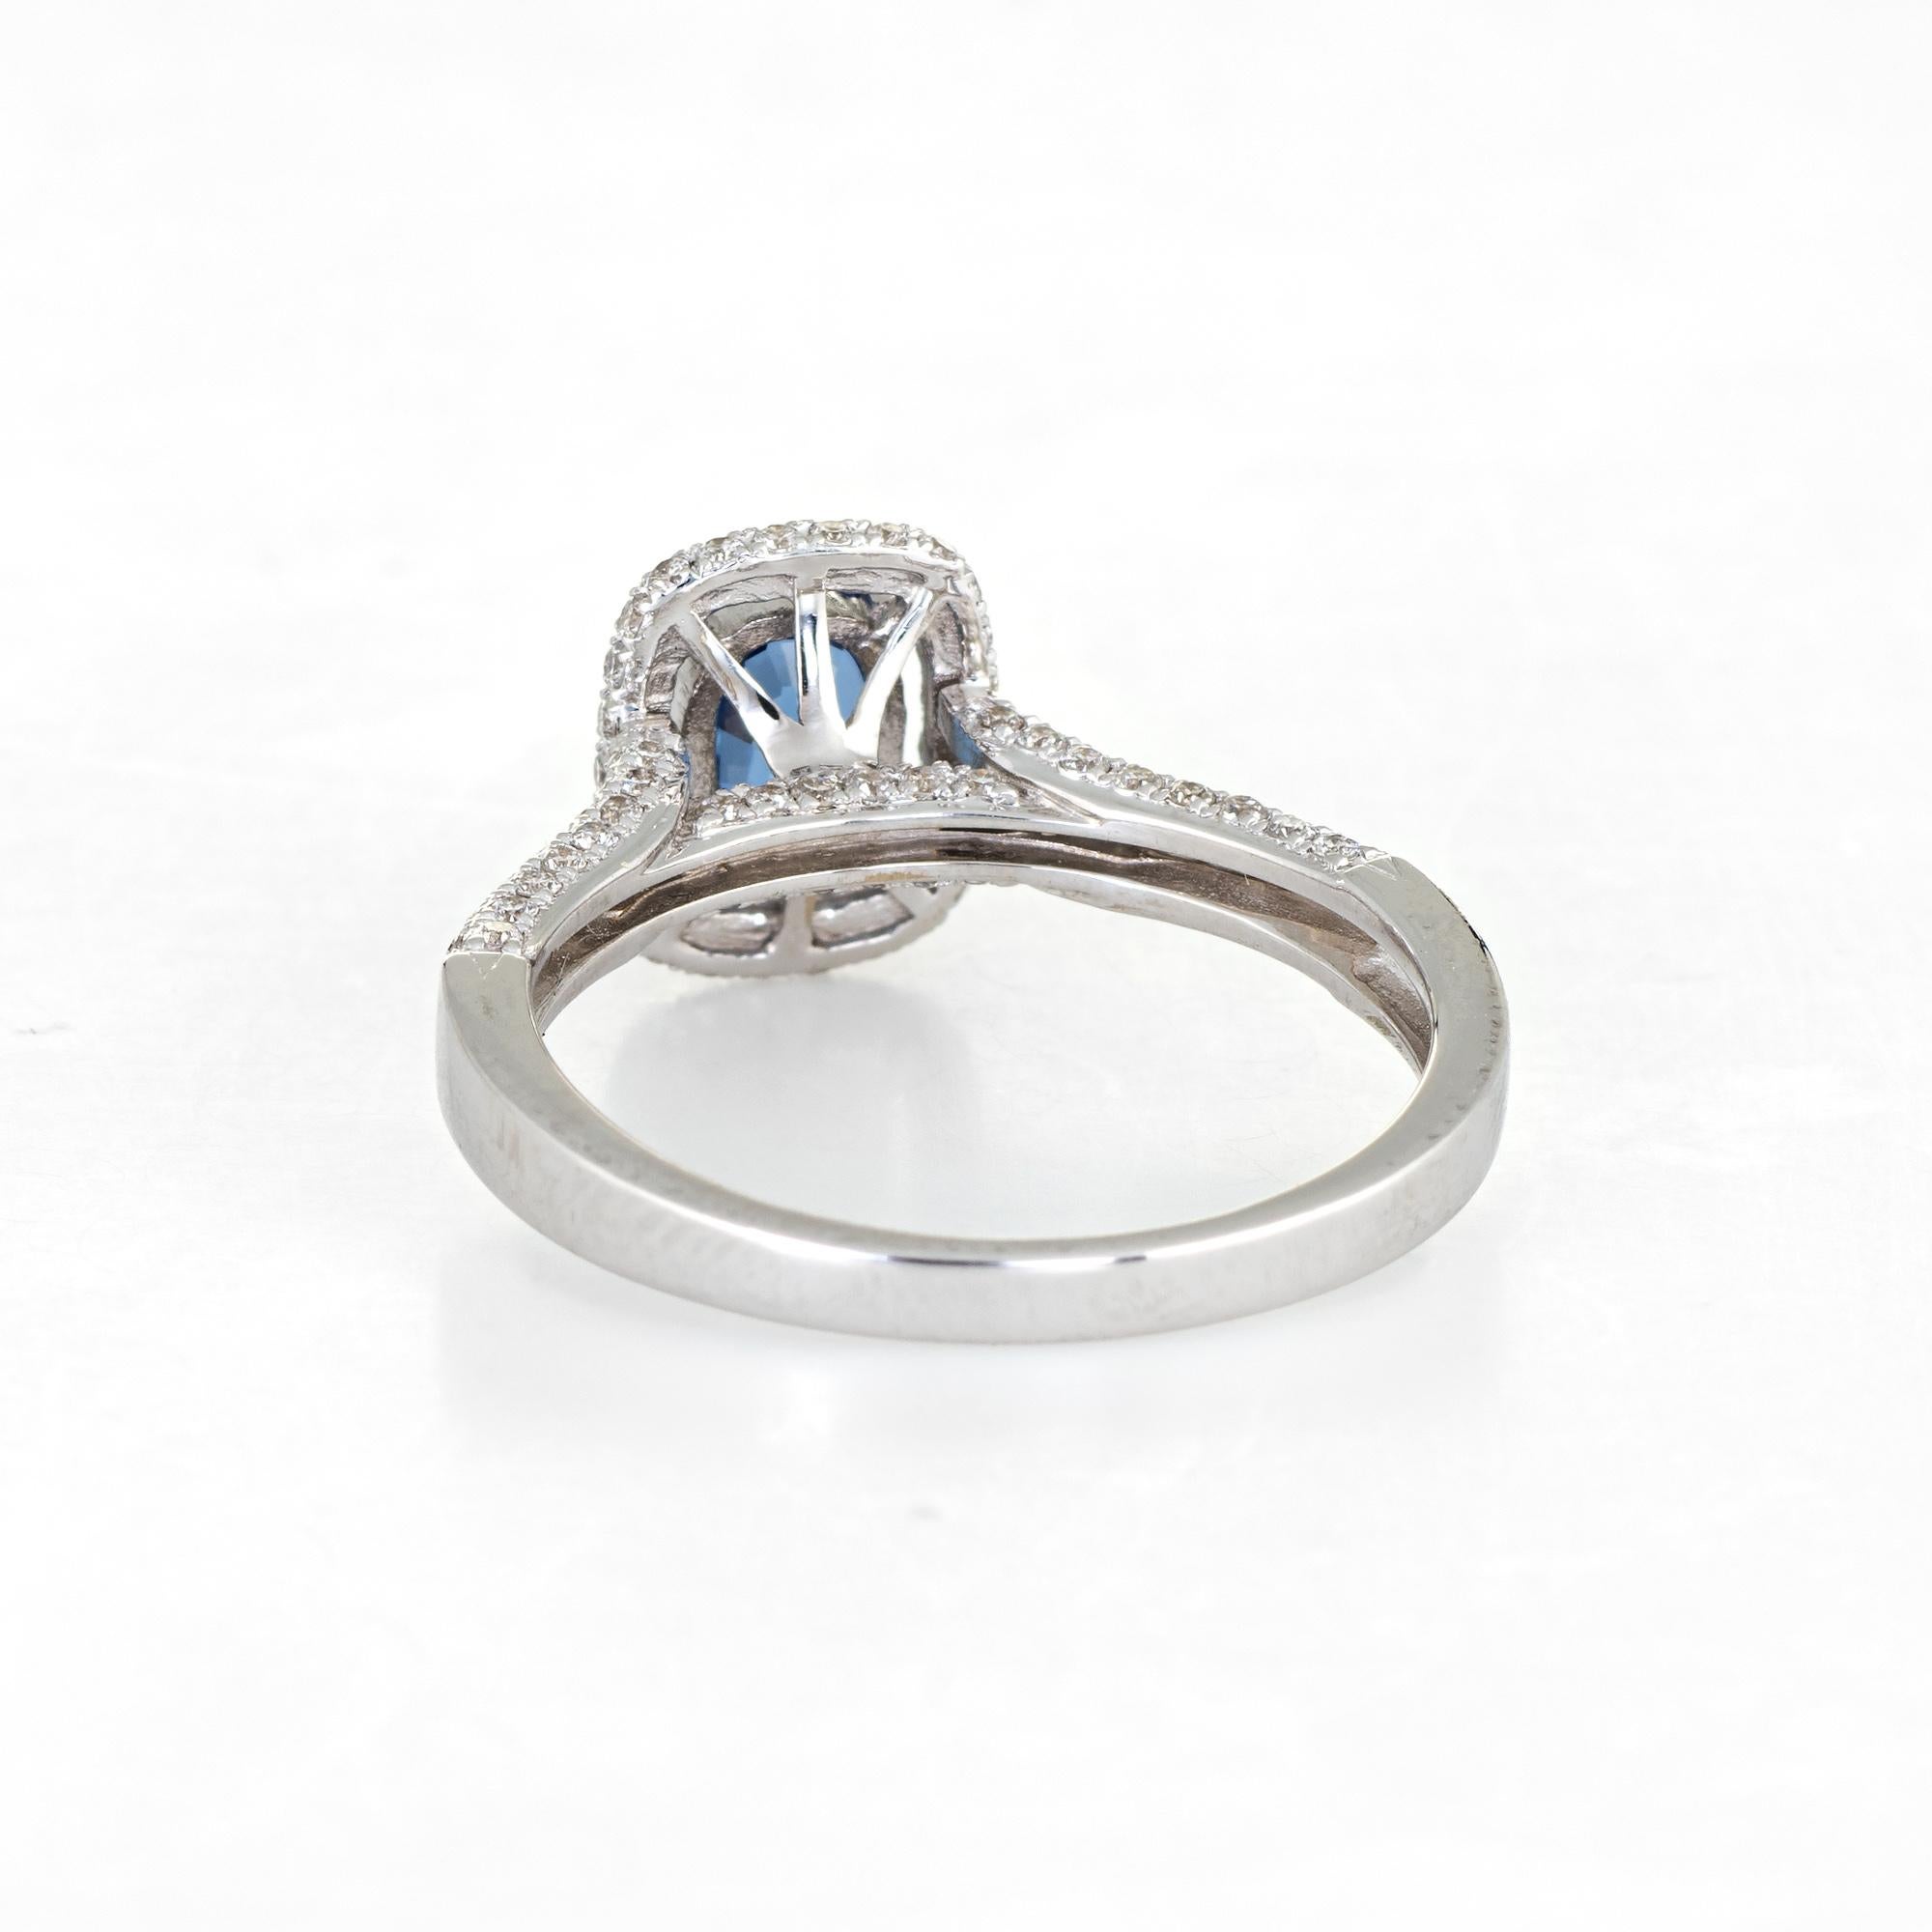 Sapphire Diamond Ring Square Halo Estate 14k White Gold Gemstone Engagement In Good Condition For Sale In Torrance, CA